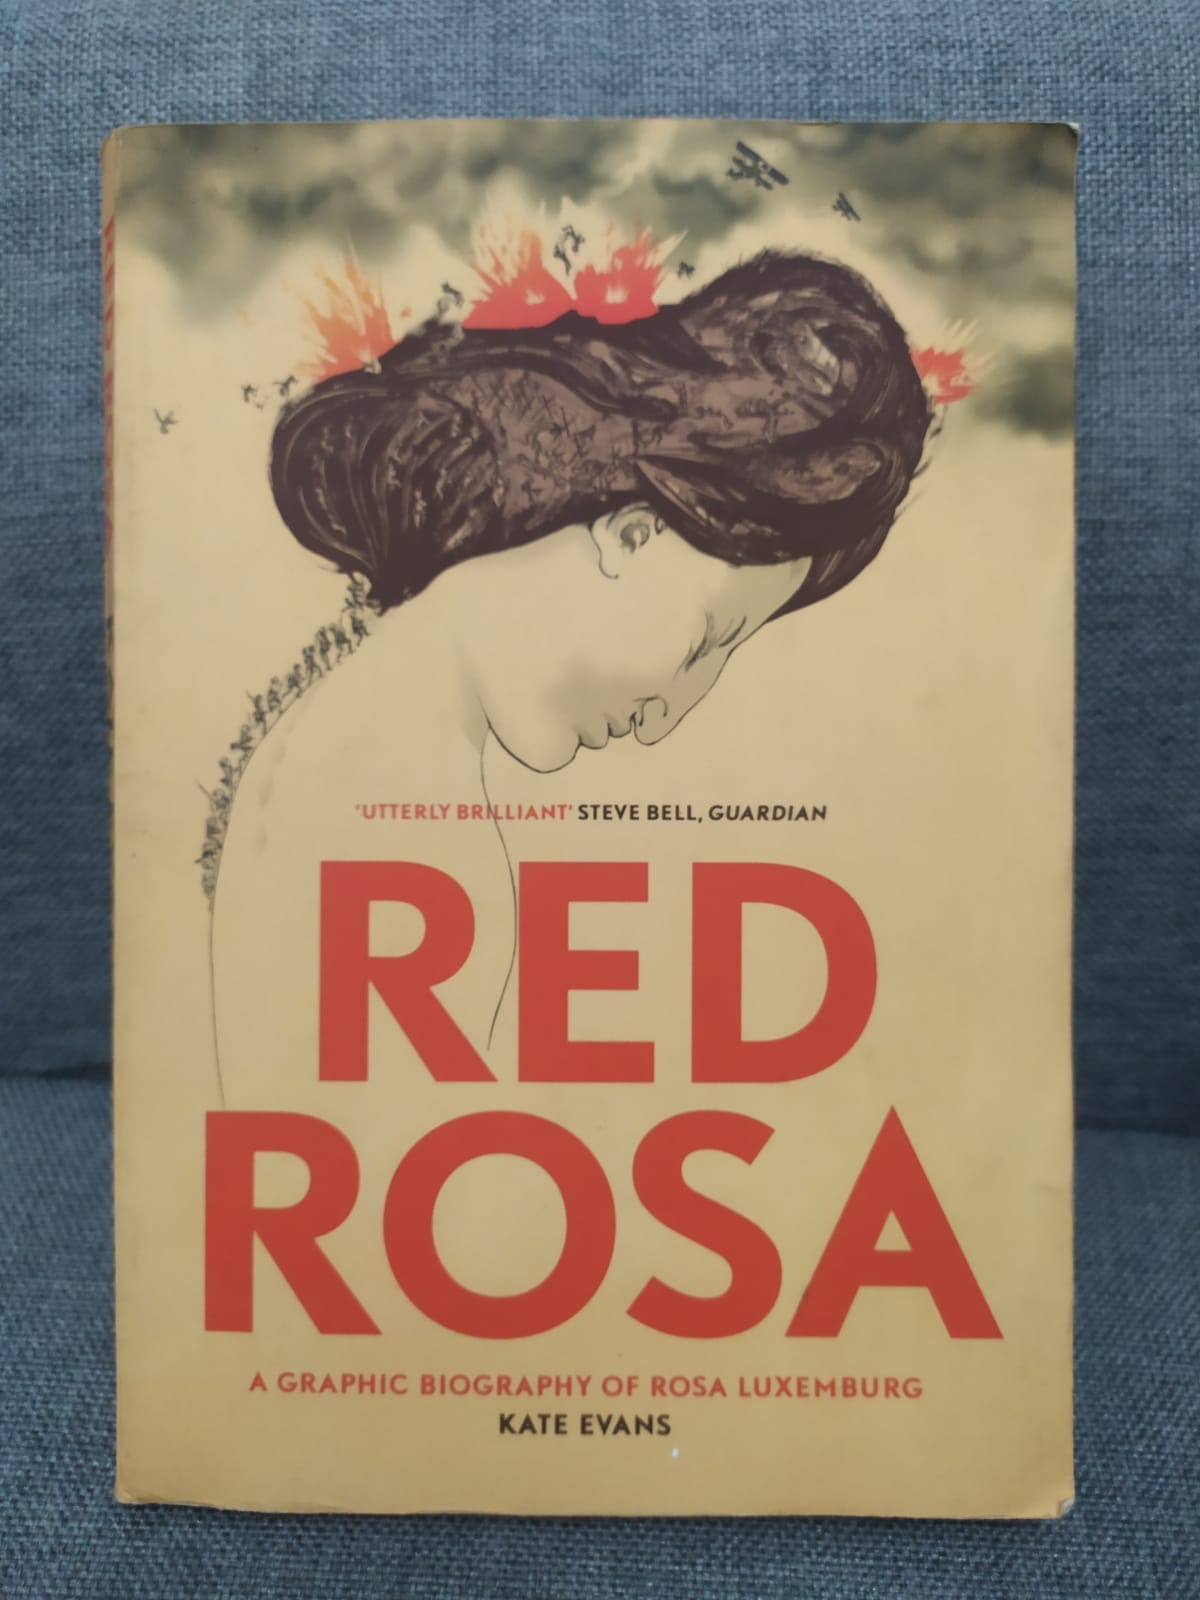 Book Notes (11): Red Rosa, A Graphic Biography of Rosa Luxemburg by Kate  Evans | by Ablaze like flames | Feb, 2022 | Medium